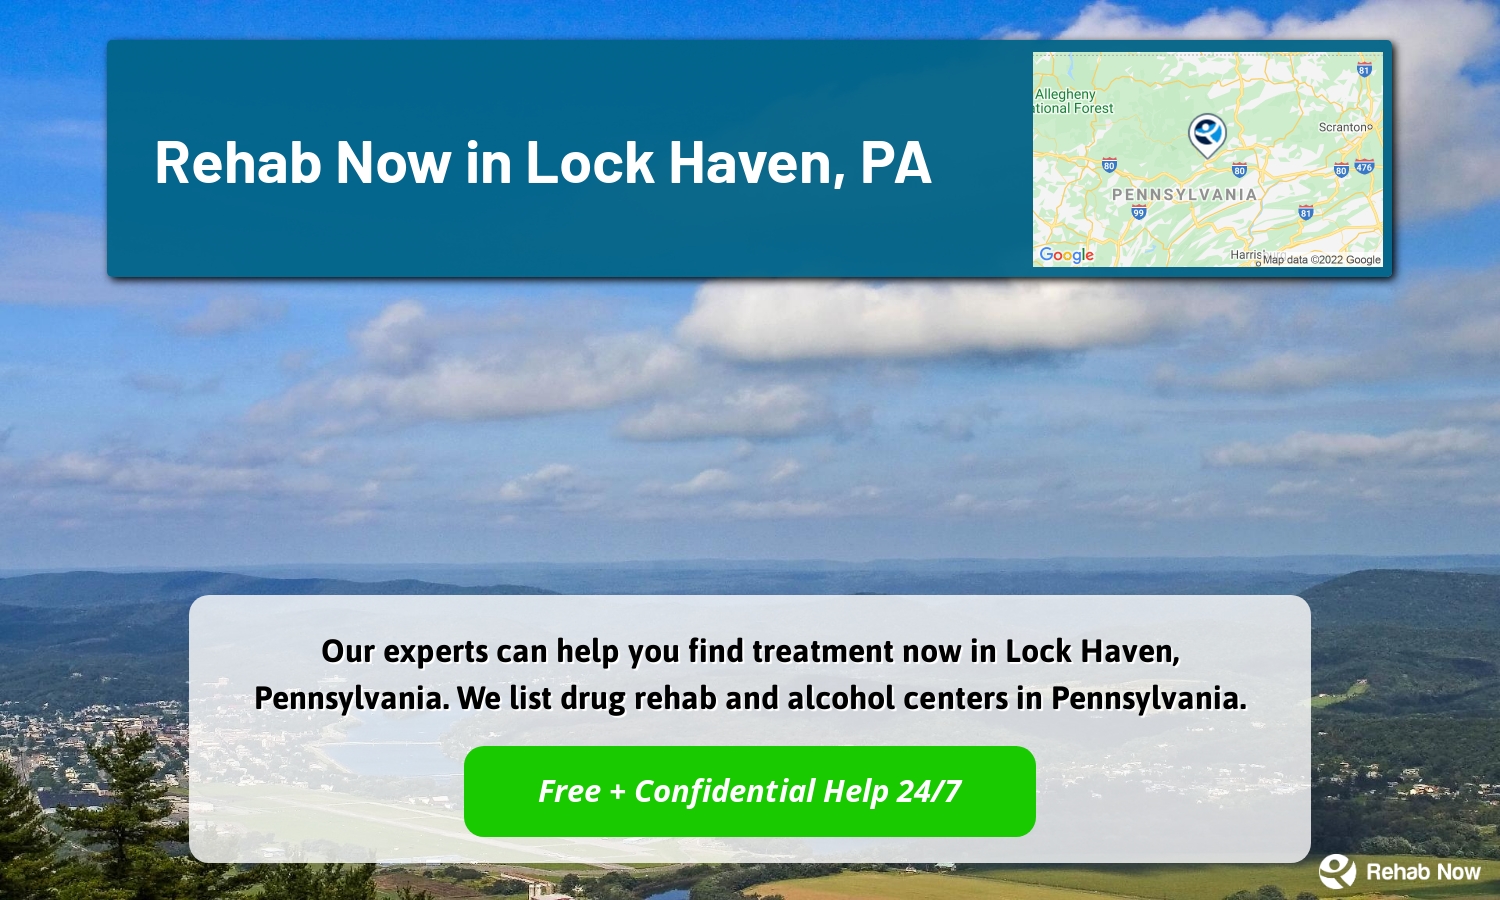 Our experts can help you find treatment now in Lock Haven, Pennsylvania. We list drug rehab and alcohol centers in Pennsylvania.